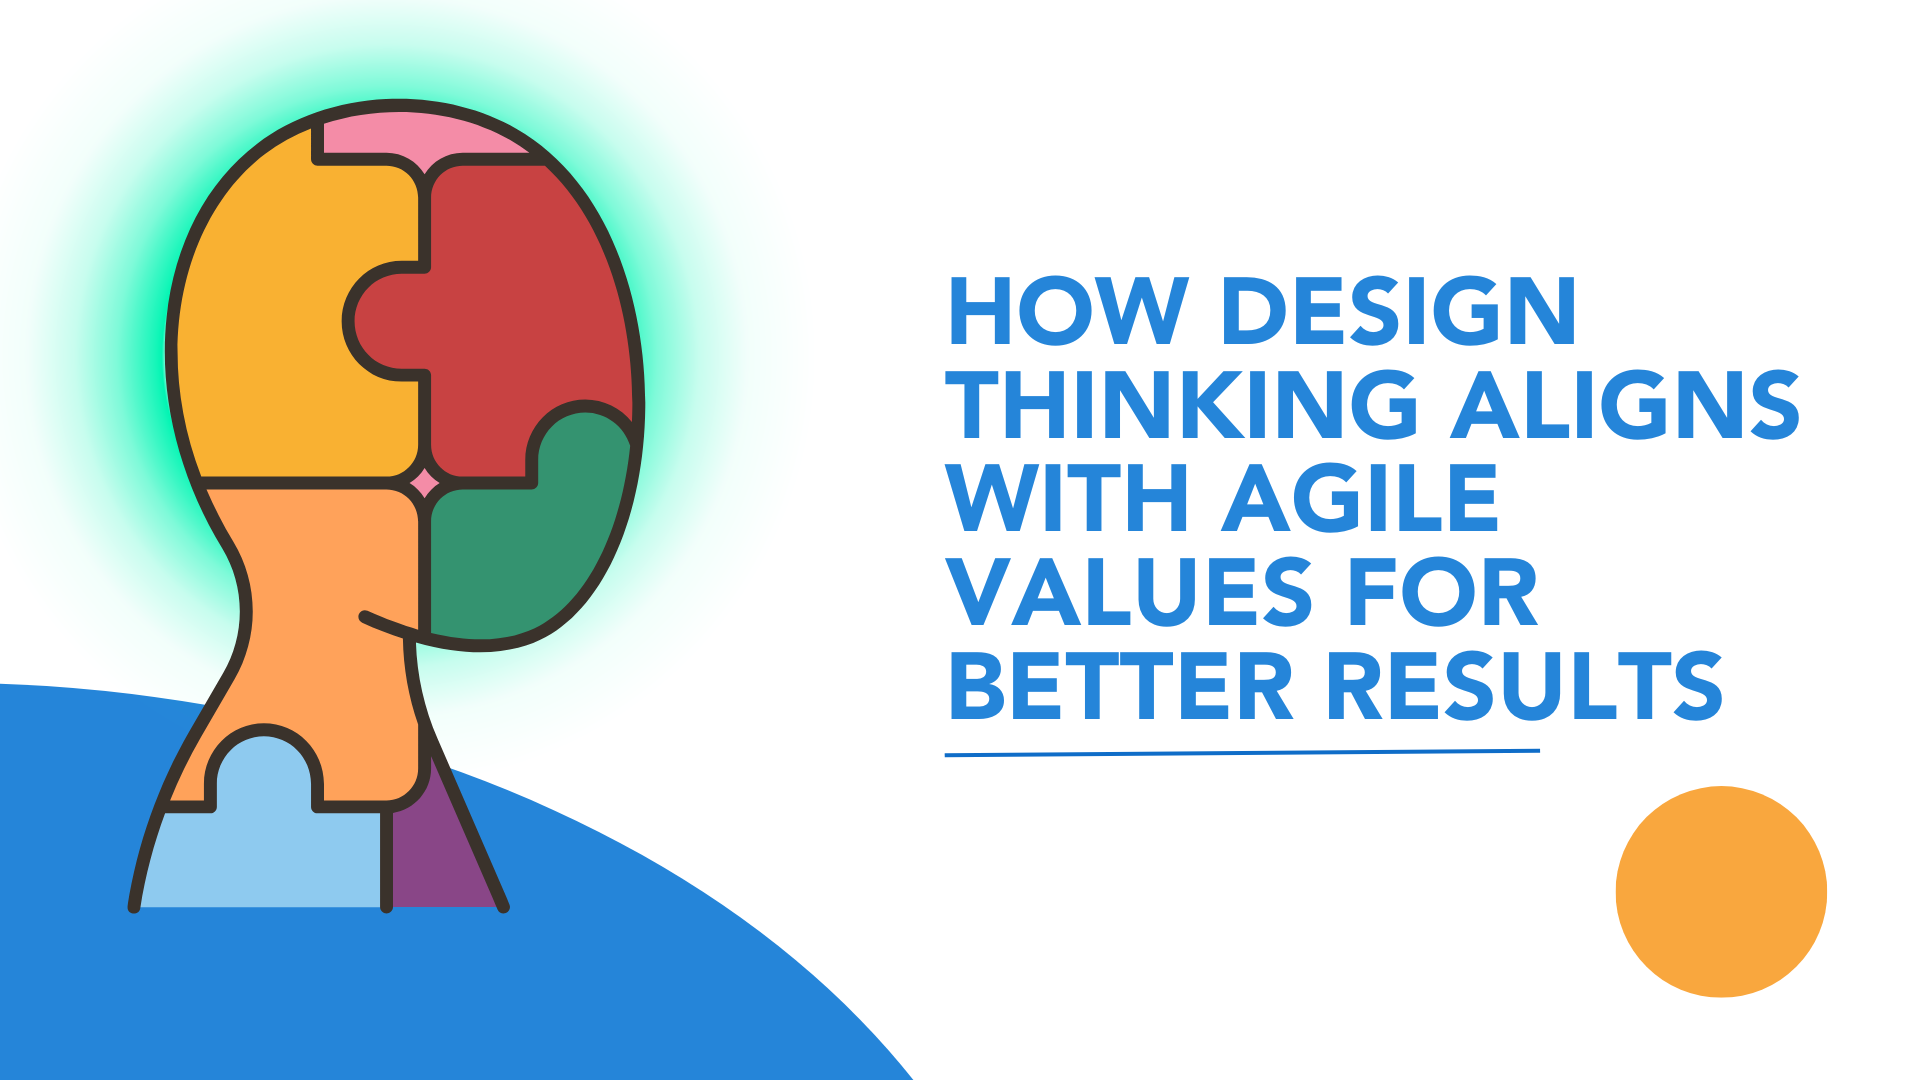 Design Thinking with Agile